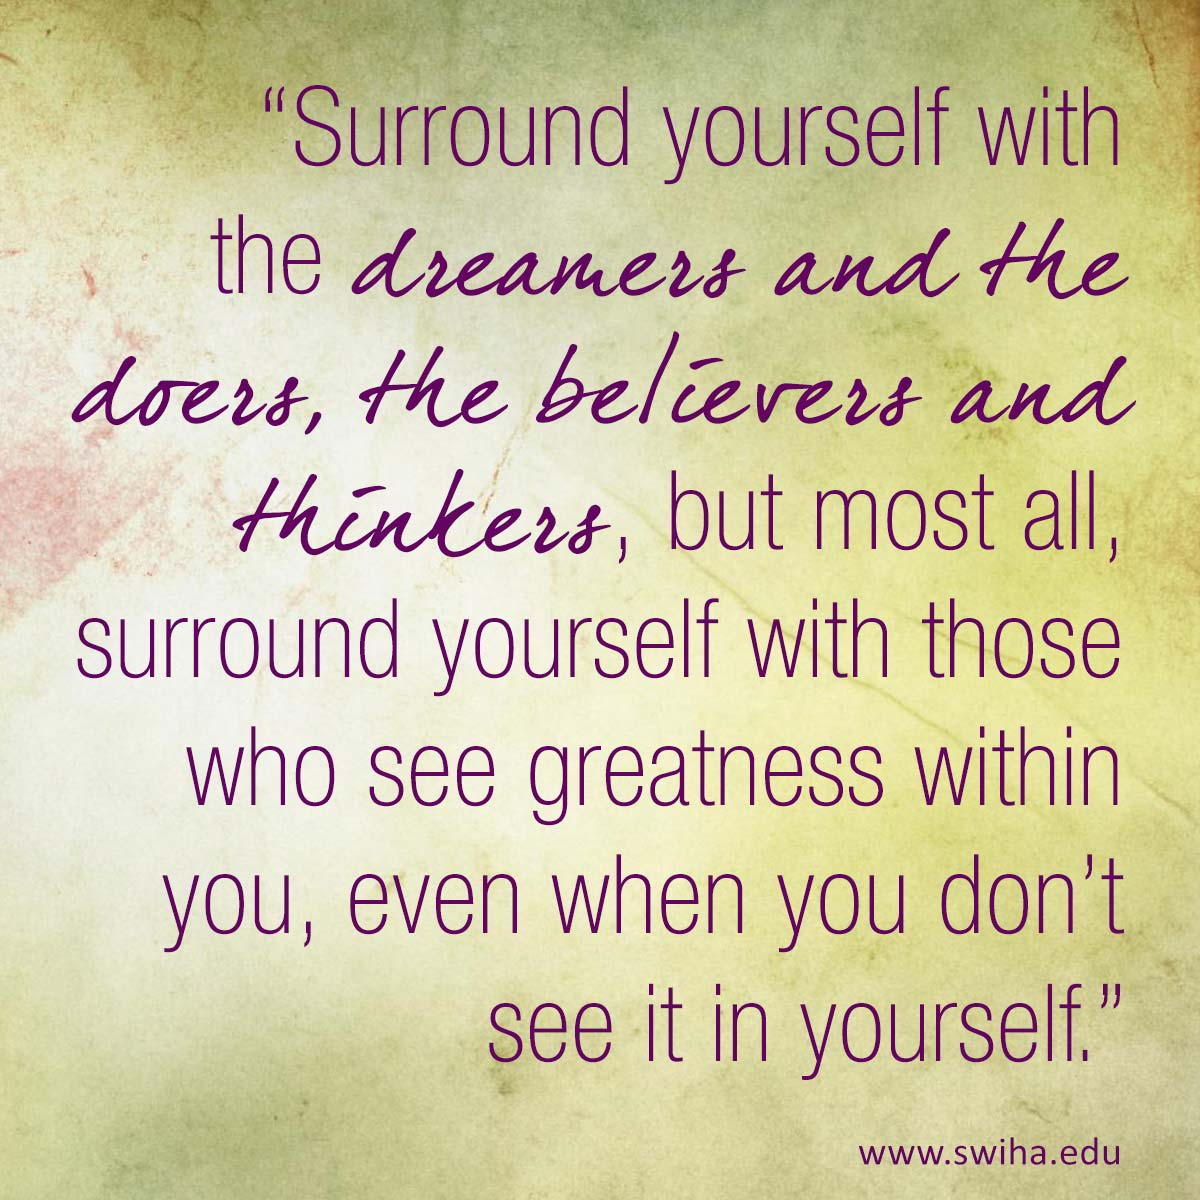 Surround-yourself-AD